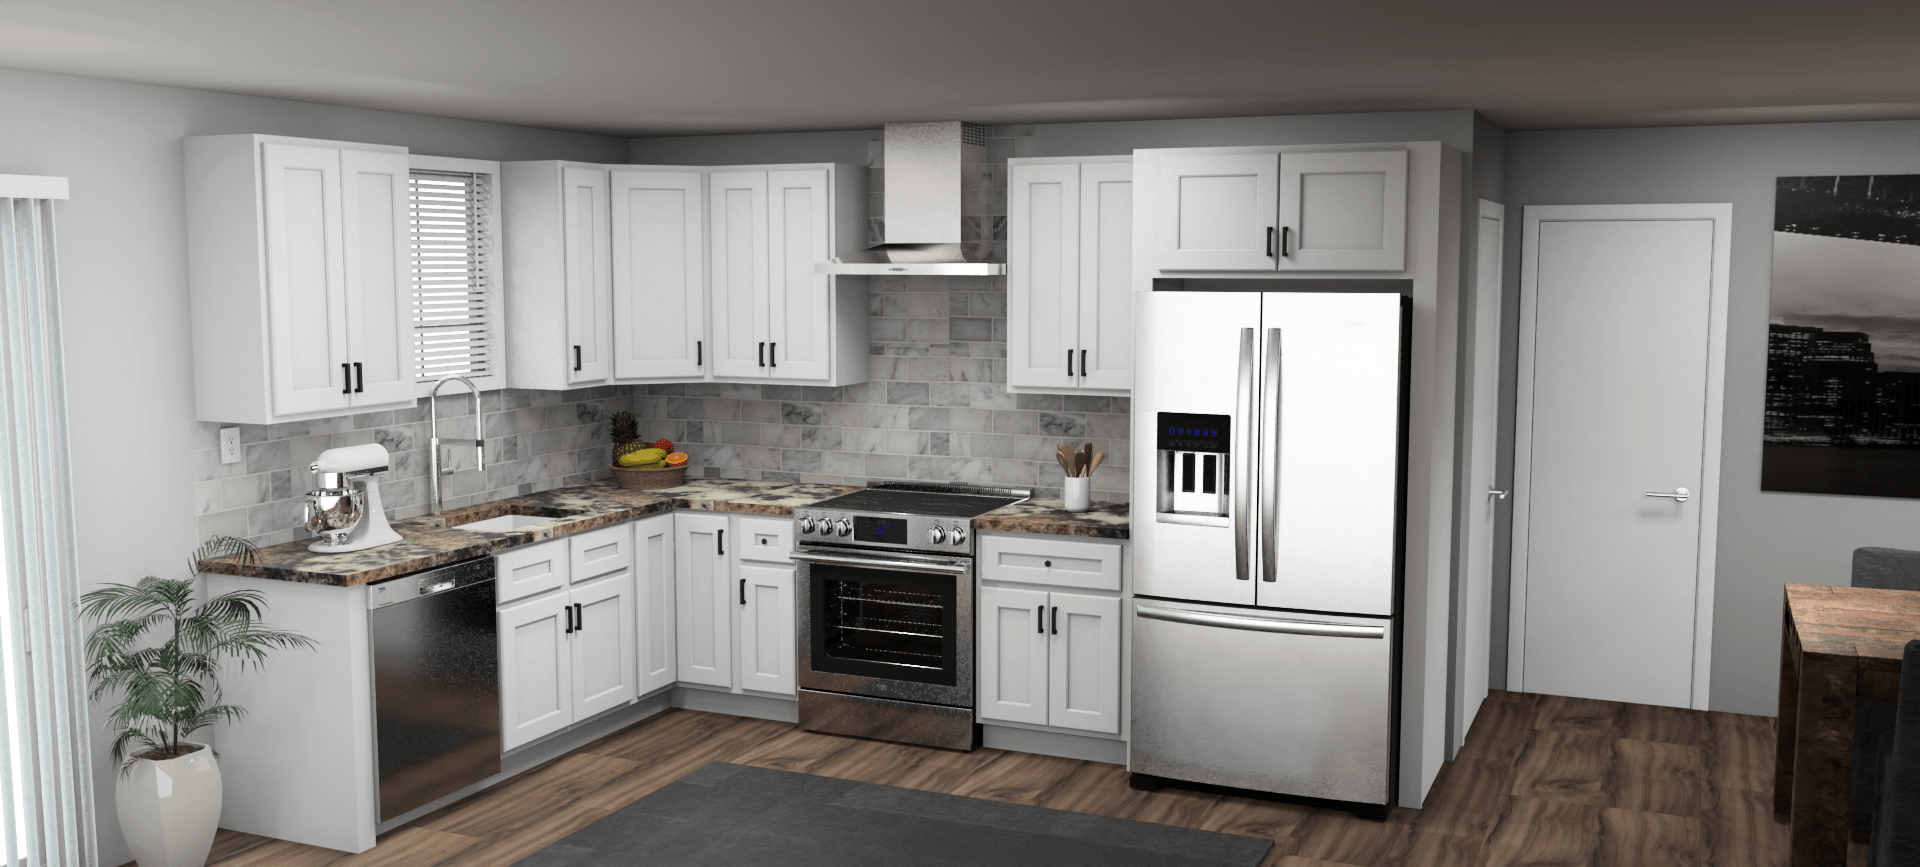 Fabuwood Quest Metro Frost 8 x 12 L Shaped Kitchen | Cabinets